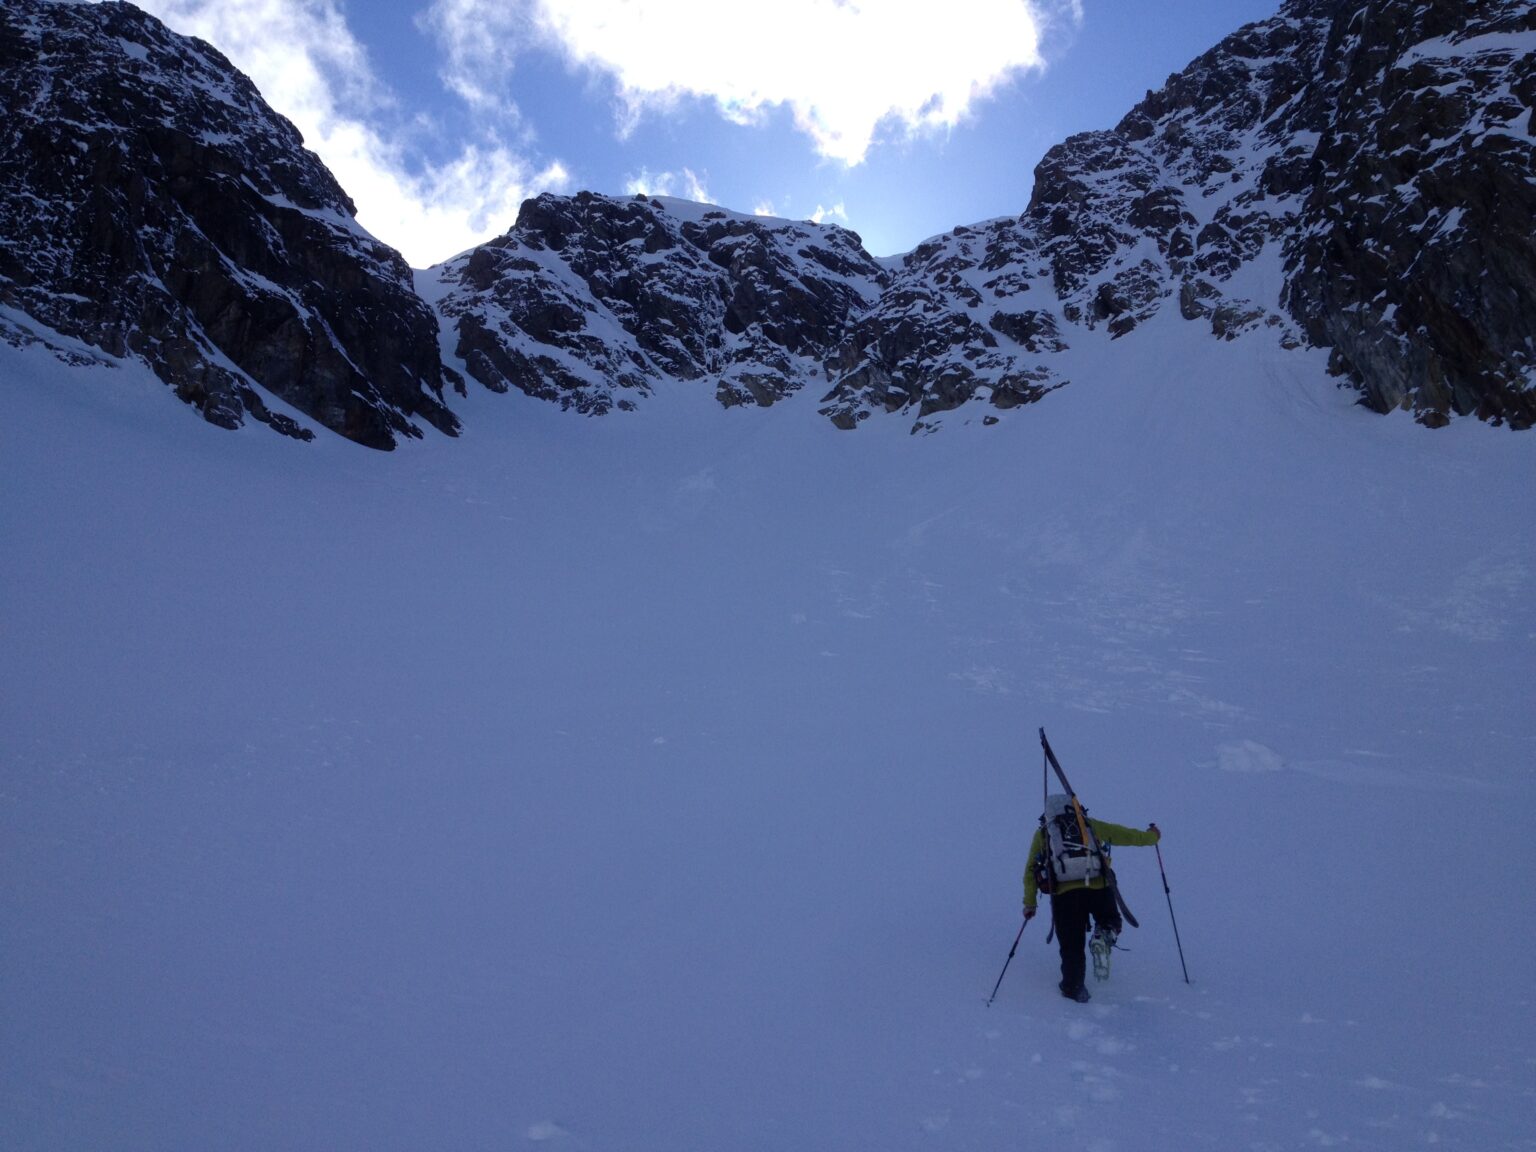 Cramponing in firm conditions